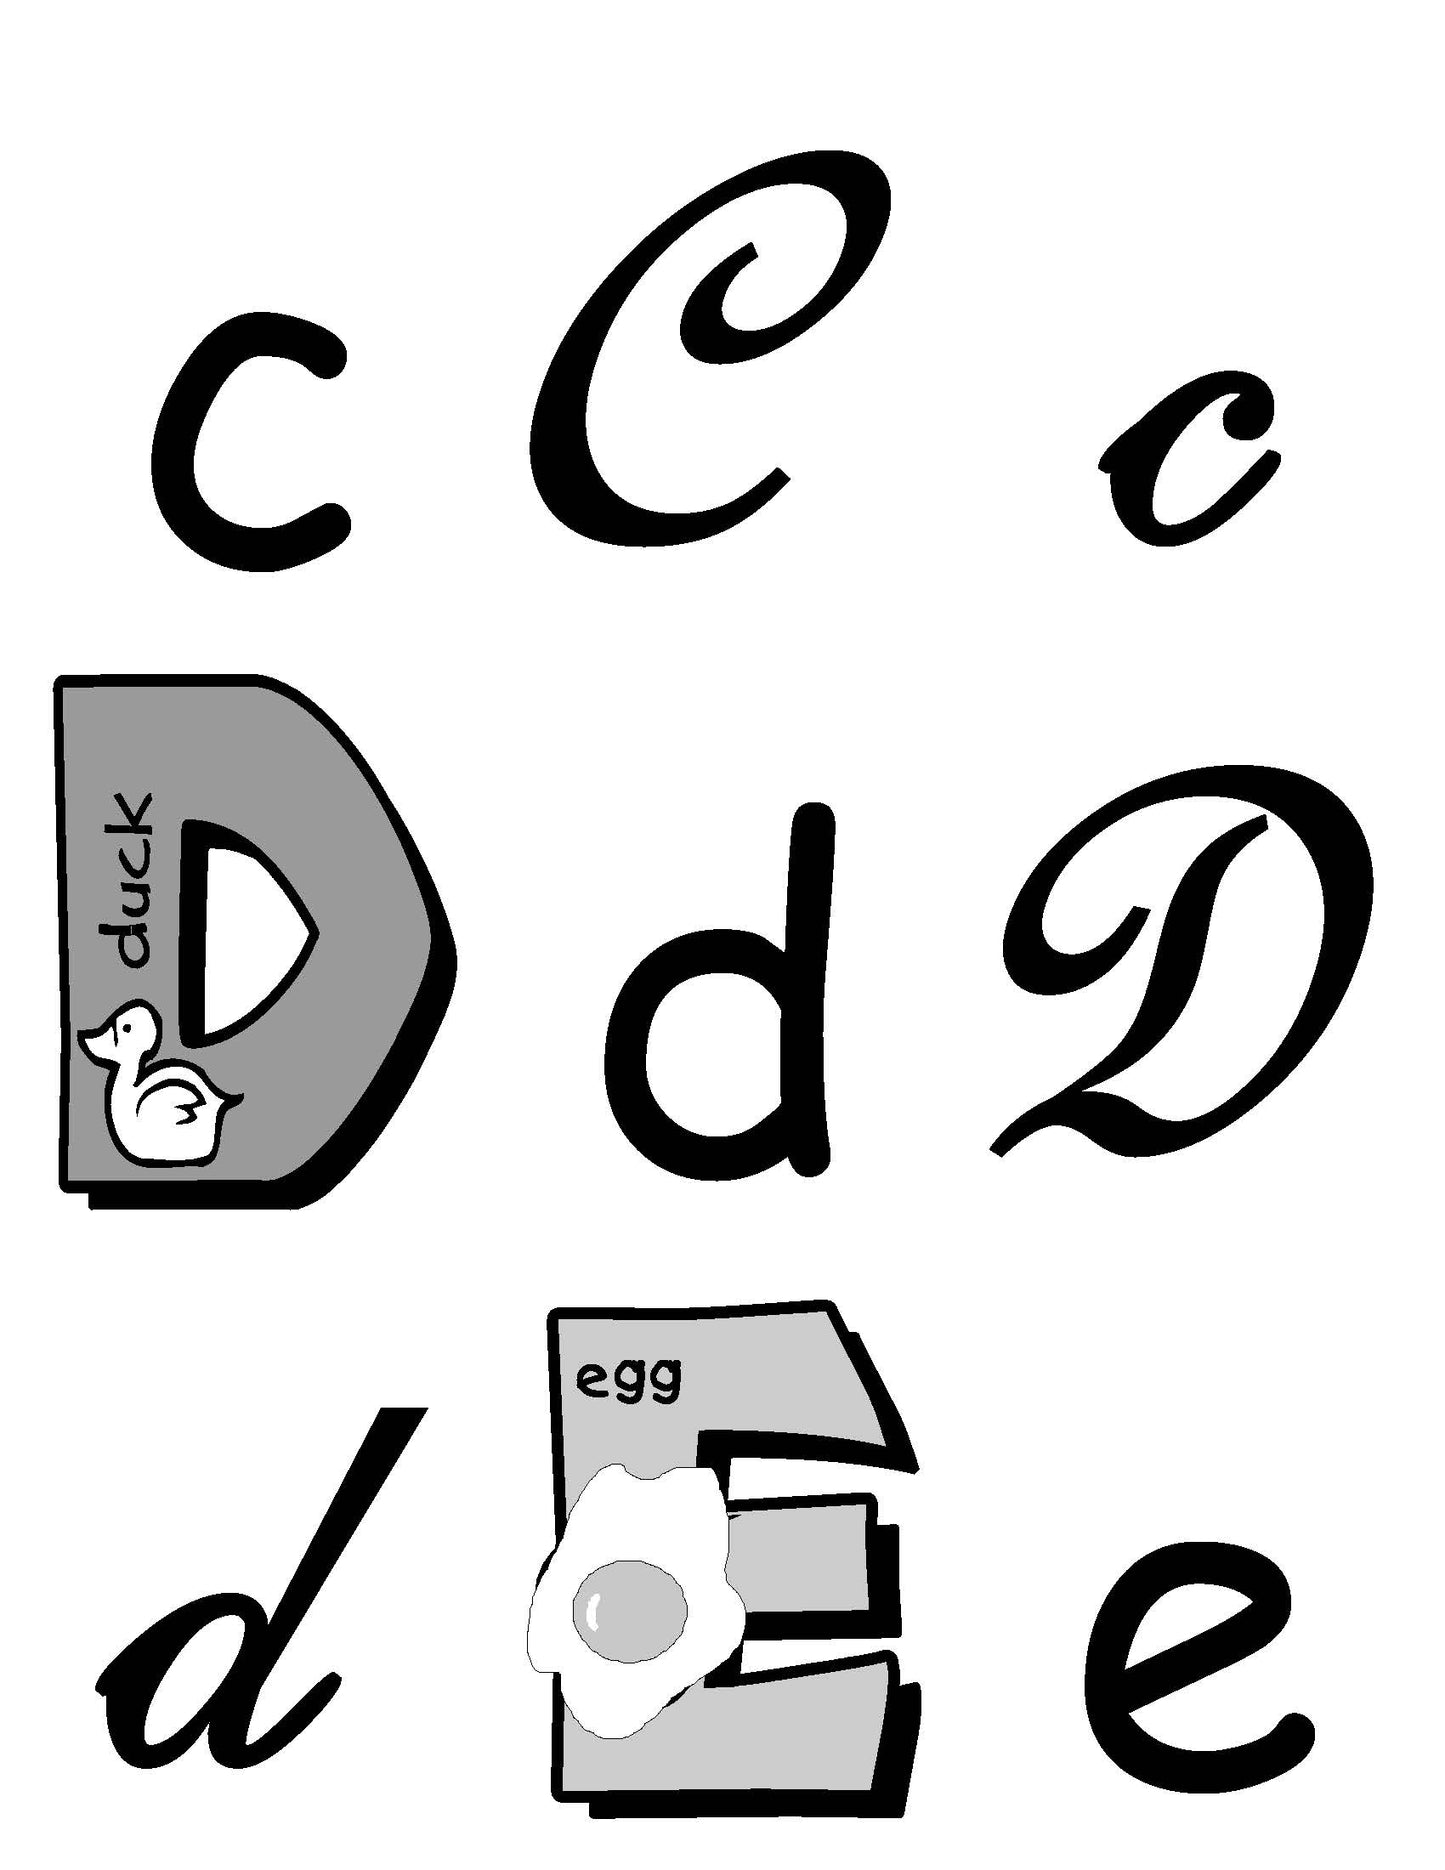 A-07.05: Use Alphabet-Letter Cards AaAa to ZzZz, Version 3, in Learning Activities & Games